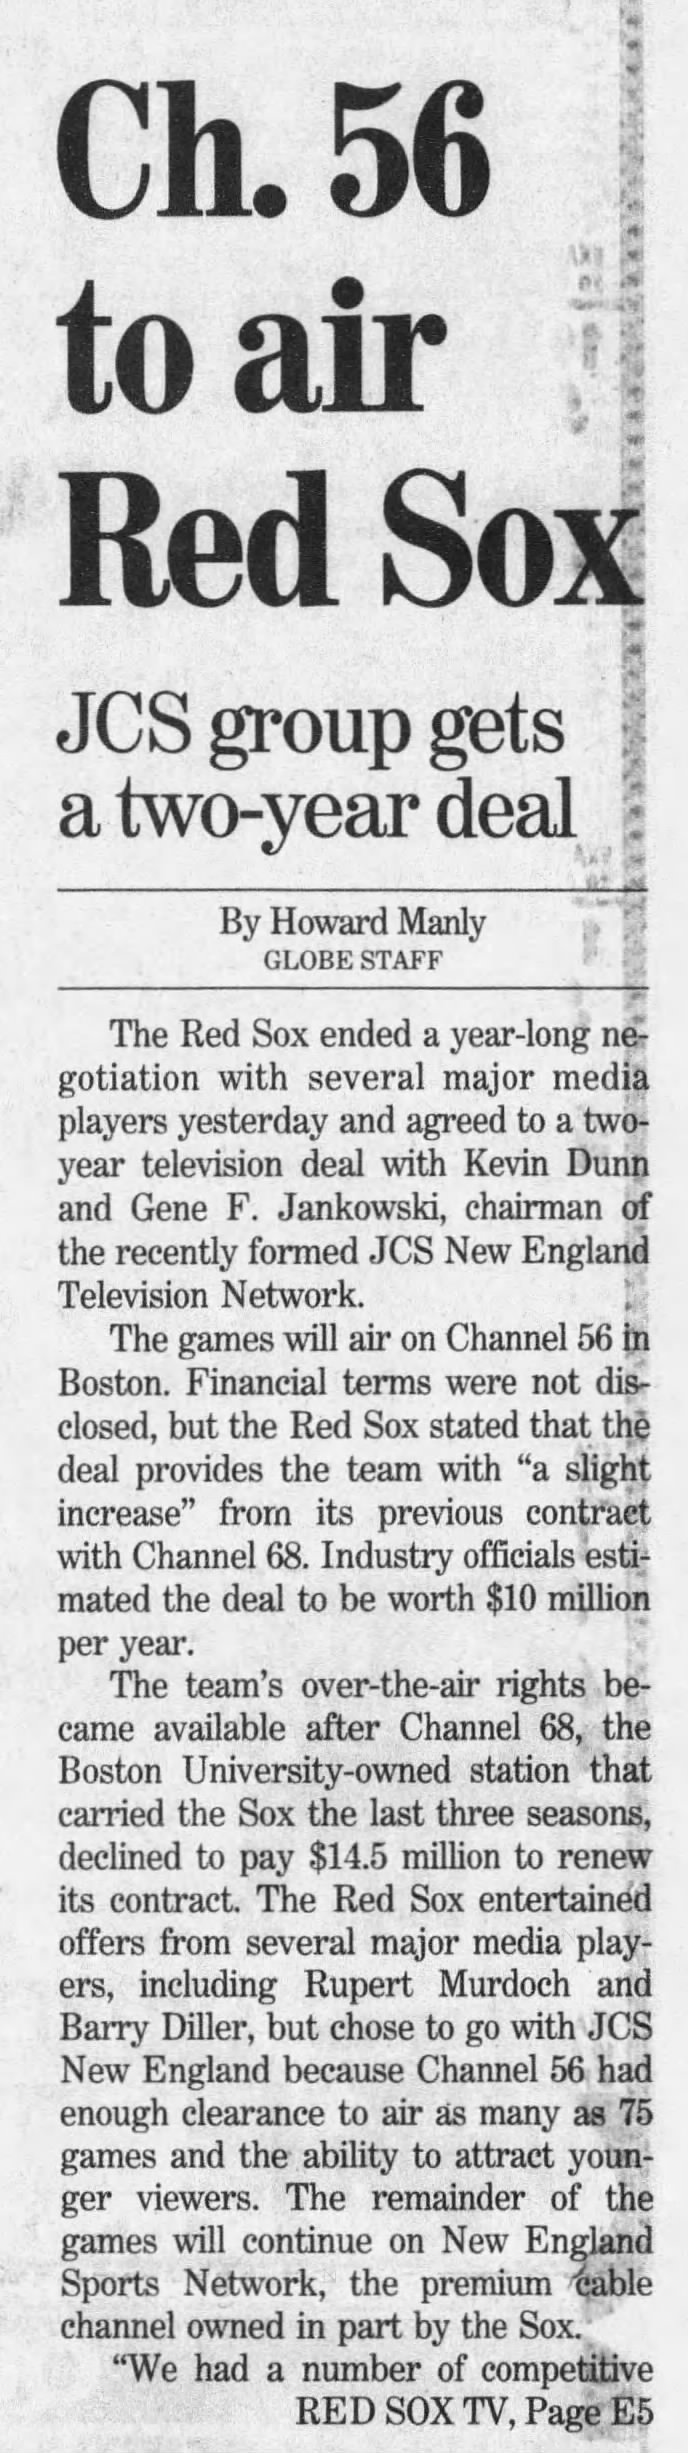 Ch. 56 to air Red Sox